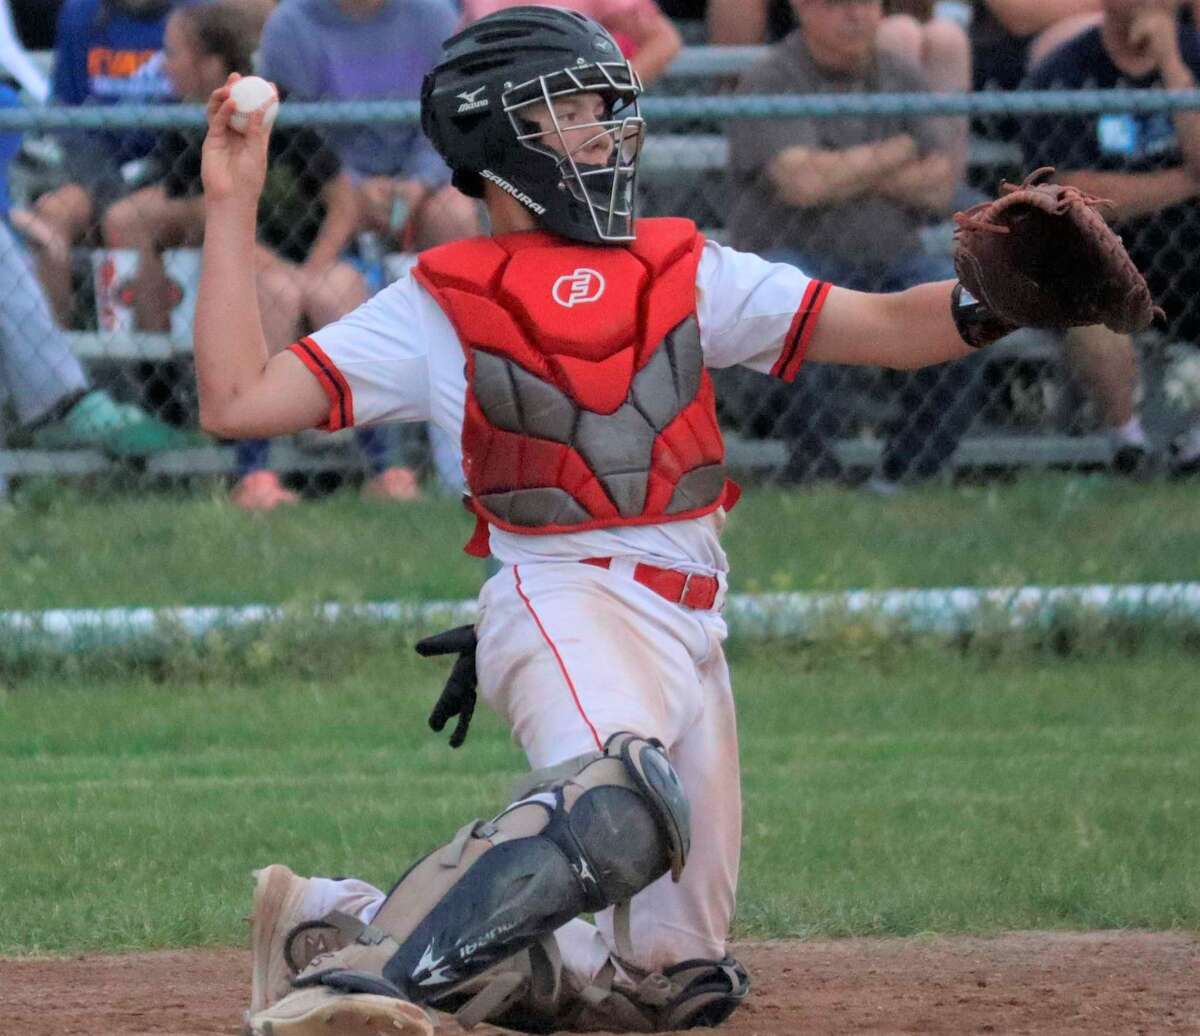 Benzie Central's Danny Wallington will be back behind the plate for the Huskies this season.